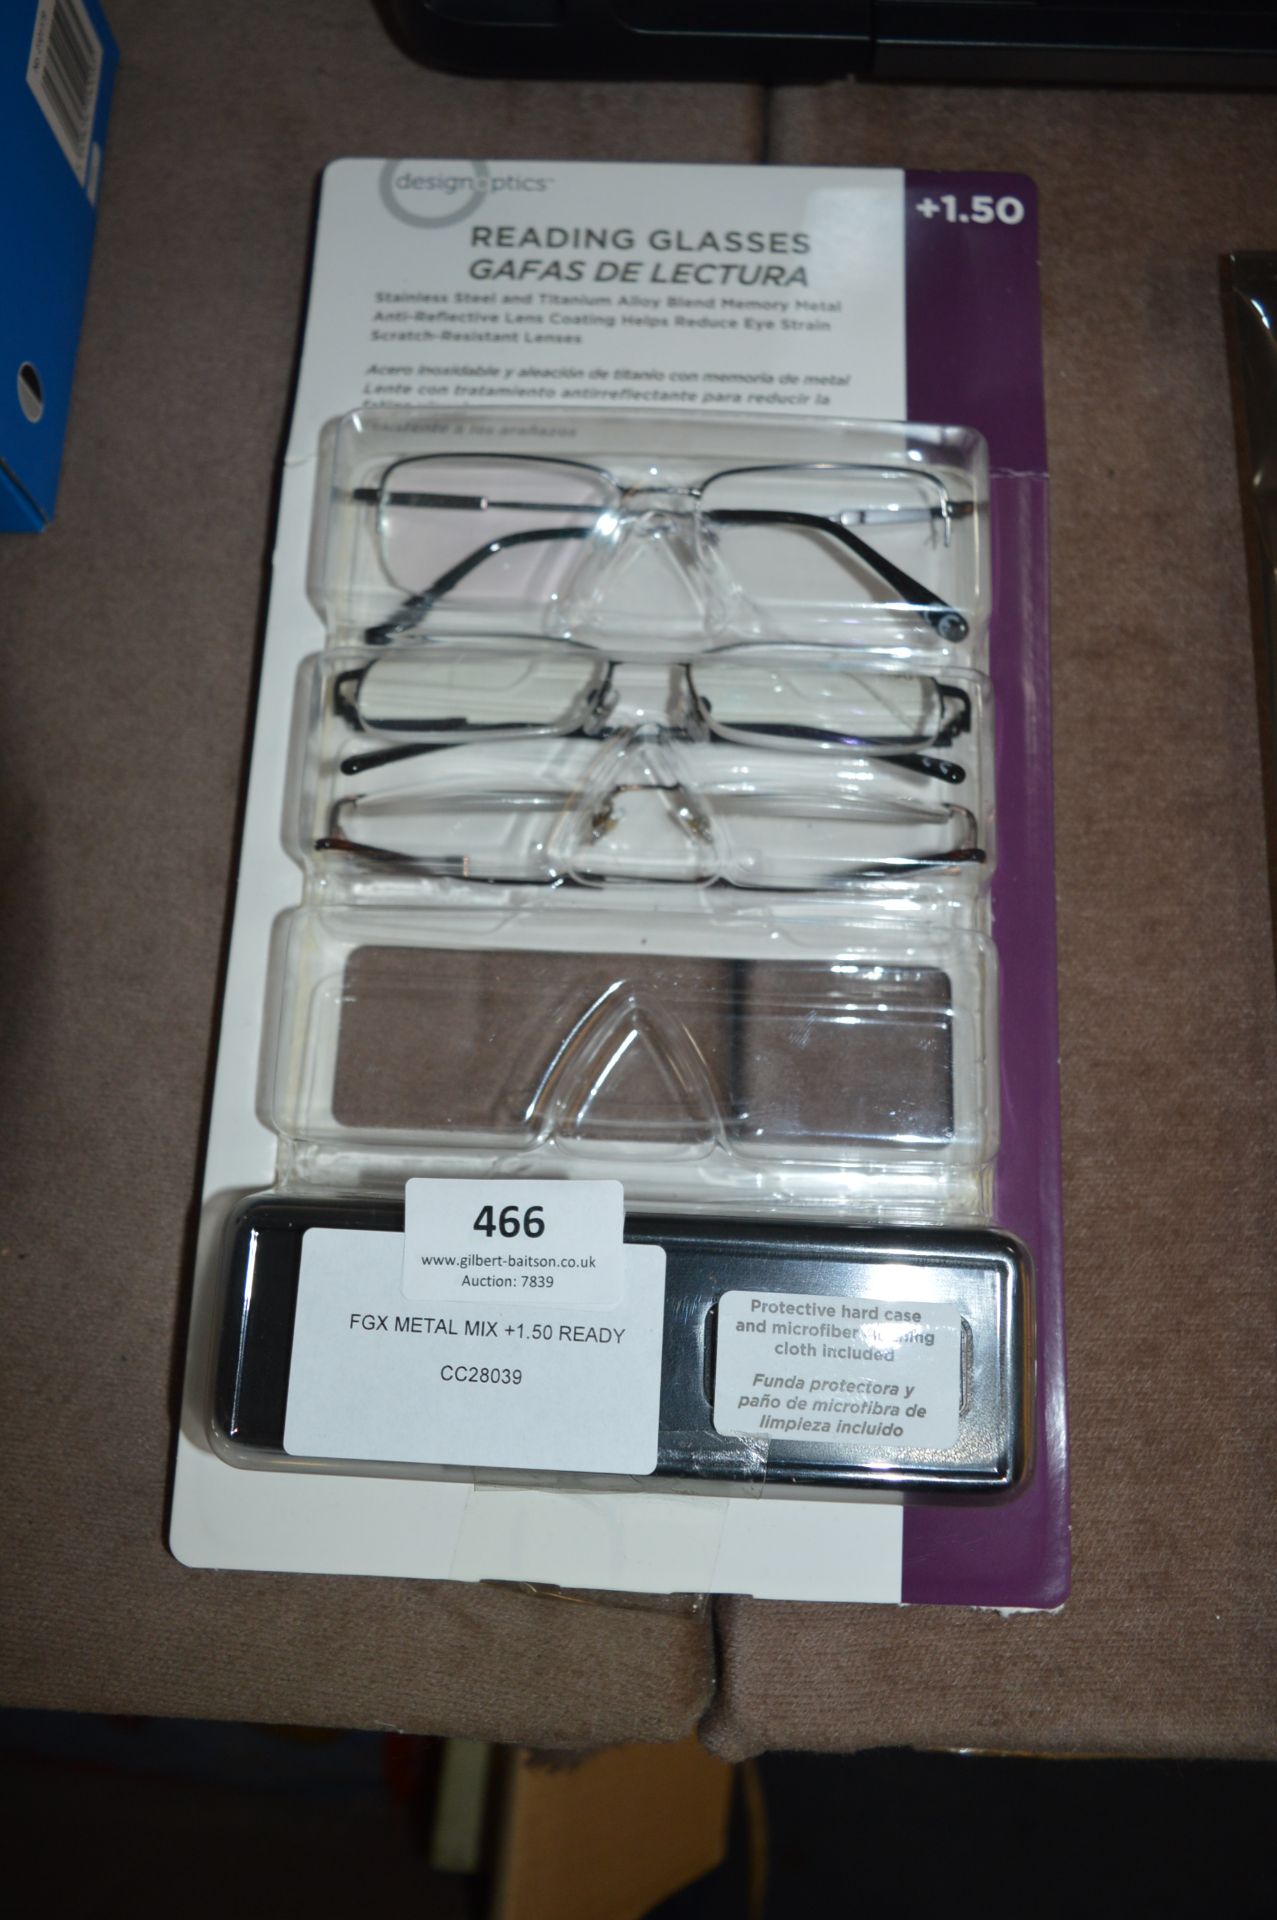 *FGX Metal Mix +1.50 Ready Reader Glasses